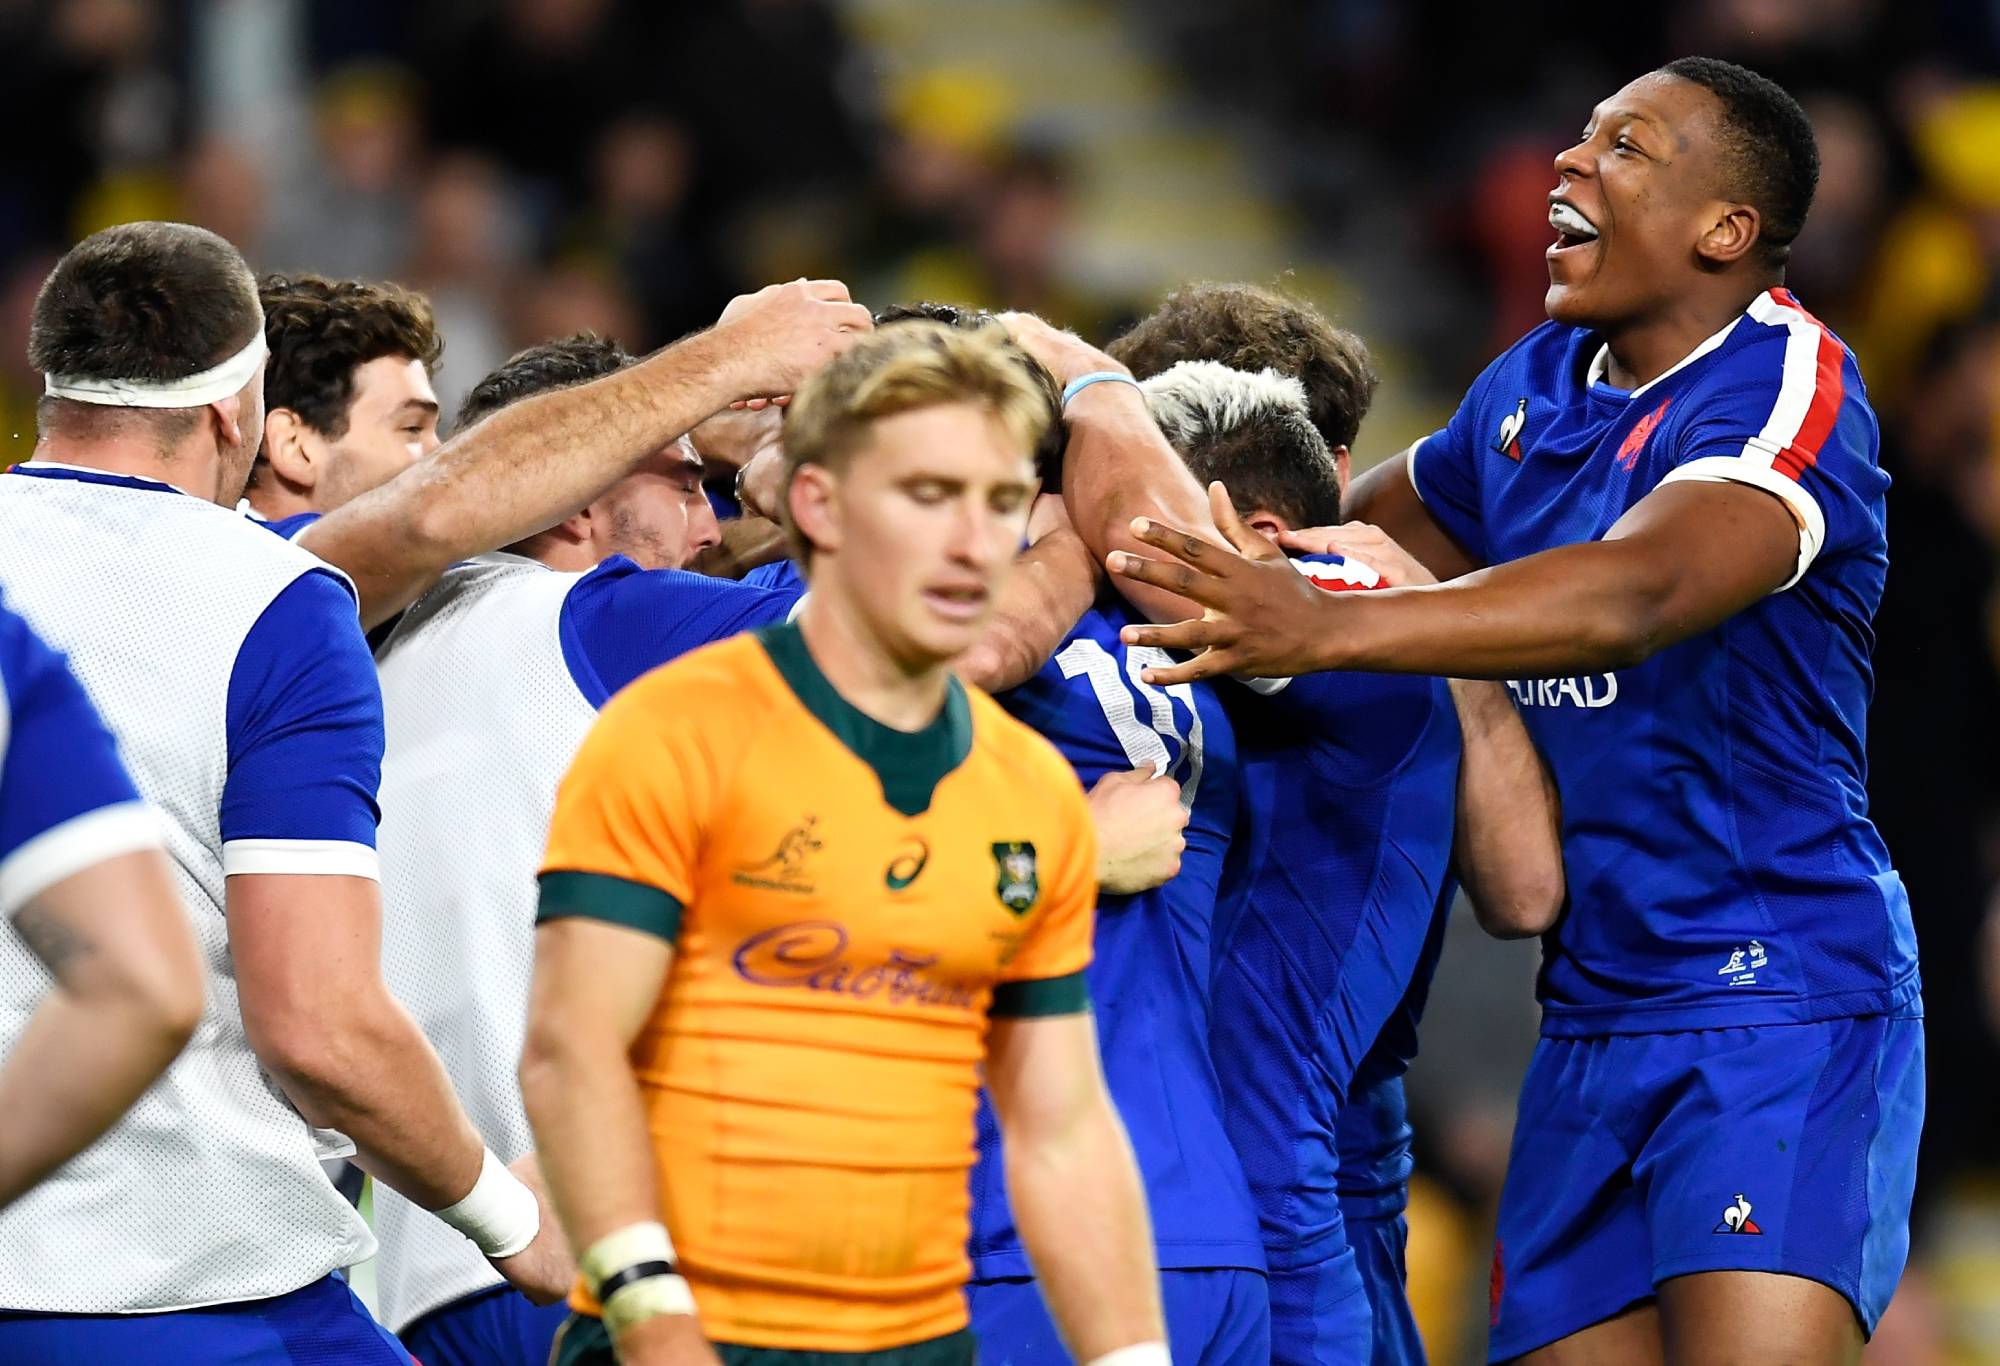 The French players and reserves celebrate with Pierre-Louis Barassi of France after he scored a try during the International Test Match between the Australian Wallabies and France at Suncorp Stadium on July 17, 2021 in Brisbane, Australia. (Photo by Albert Perez/Getty Images)